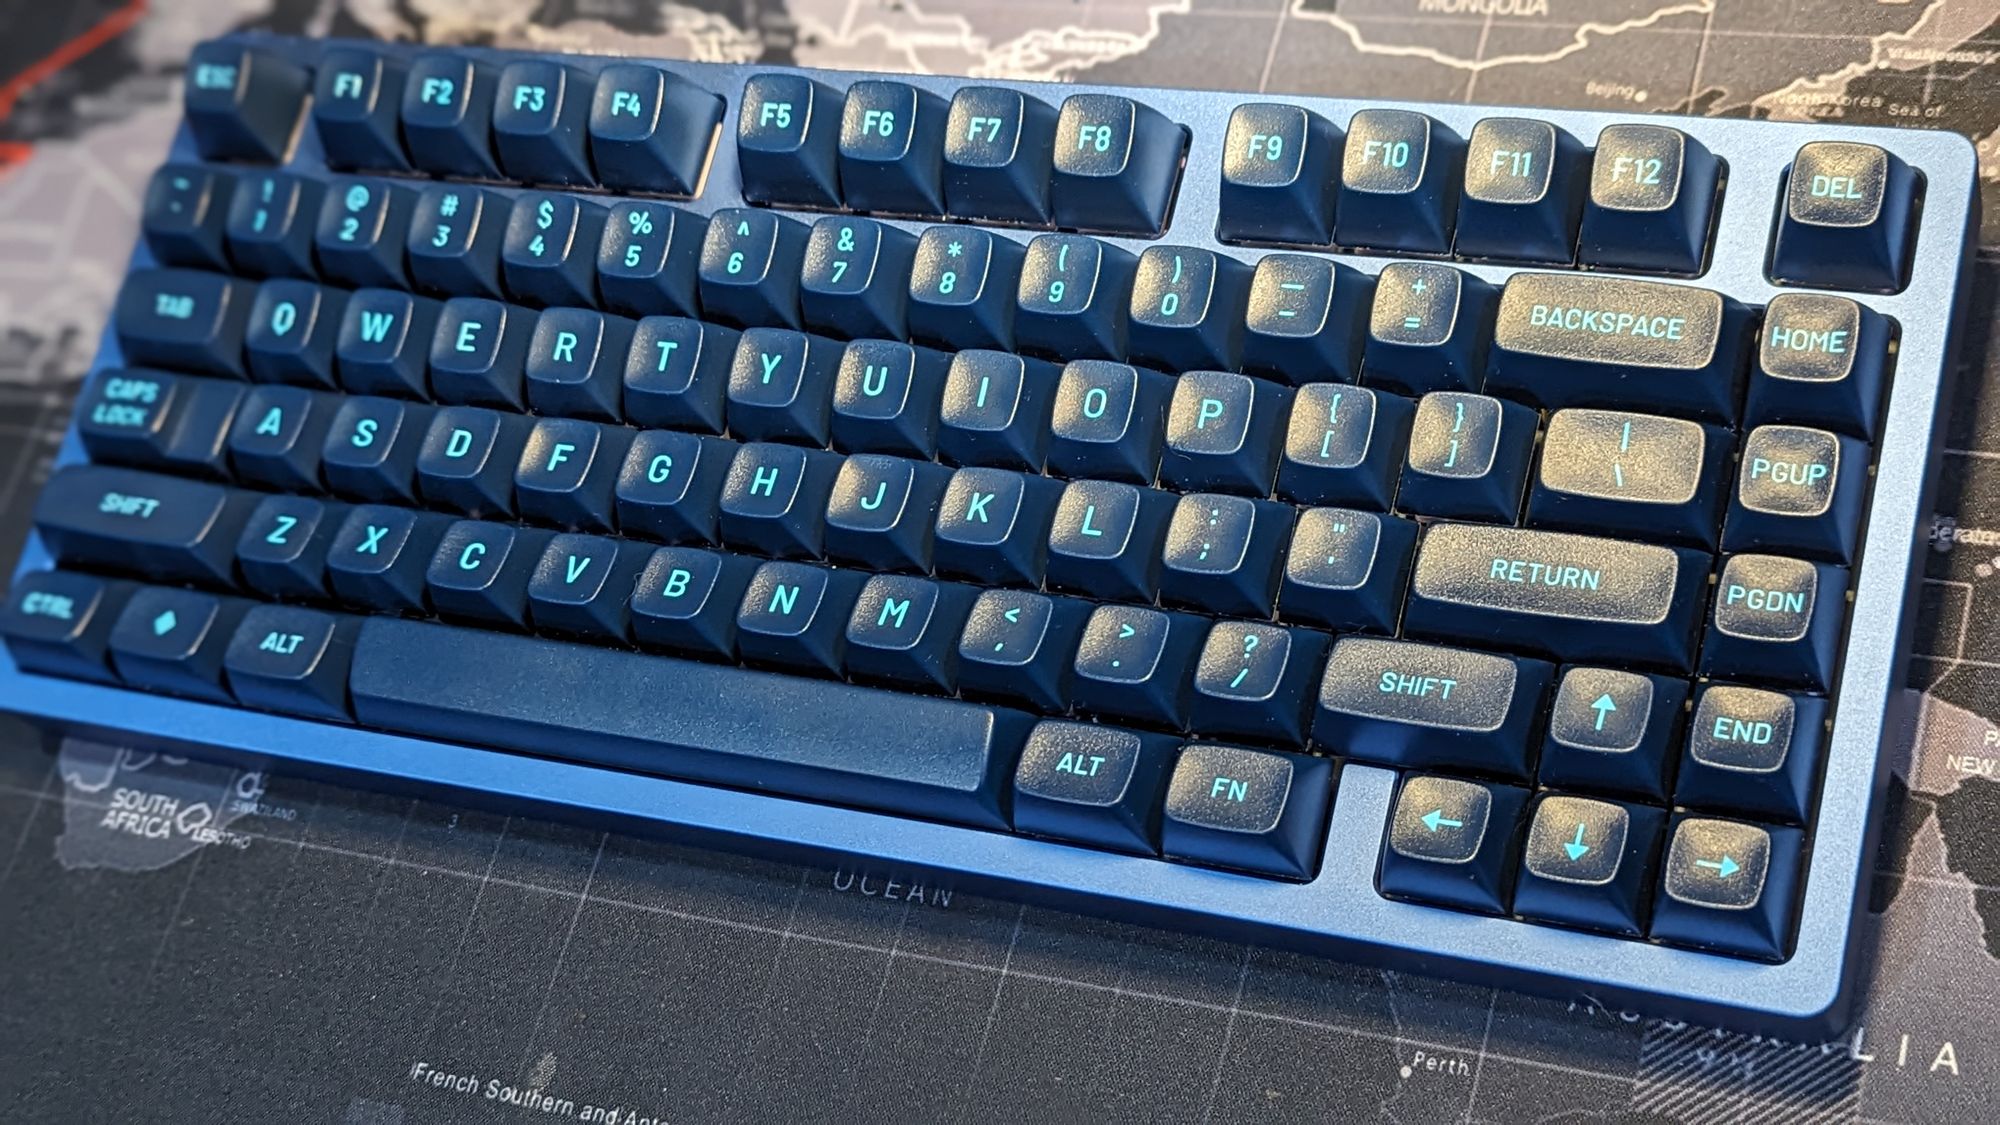 MKC75: Custom Keyboard Features, Budget Price Tag! Could This Be The Budget Aluminum Keyboard King?